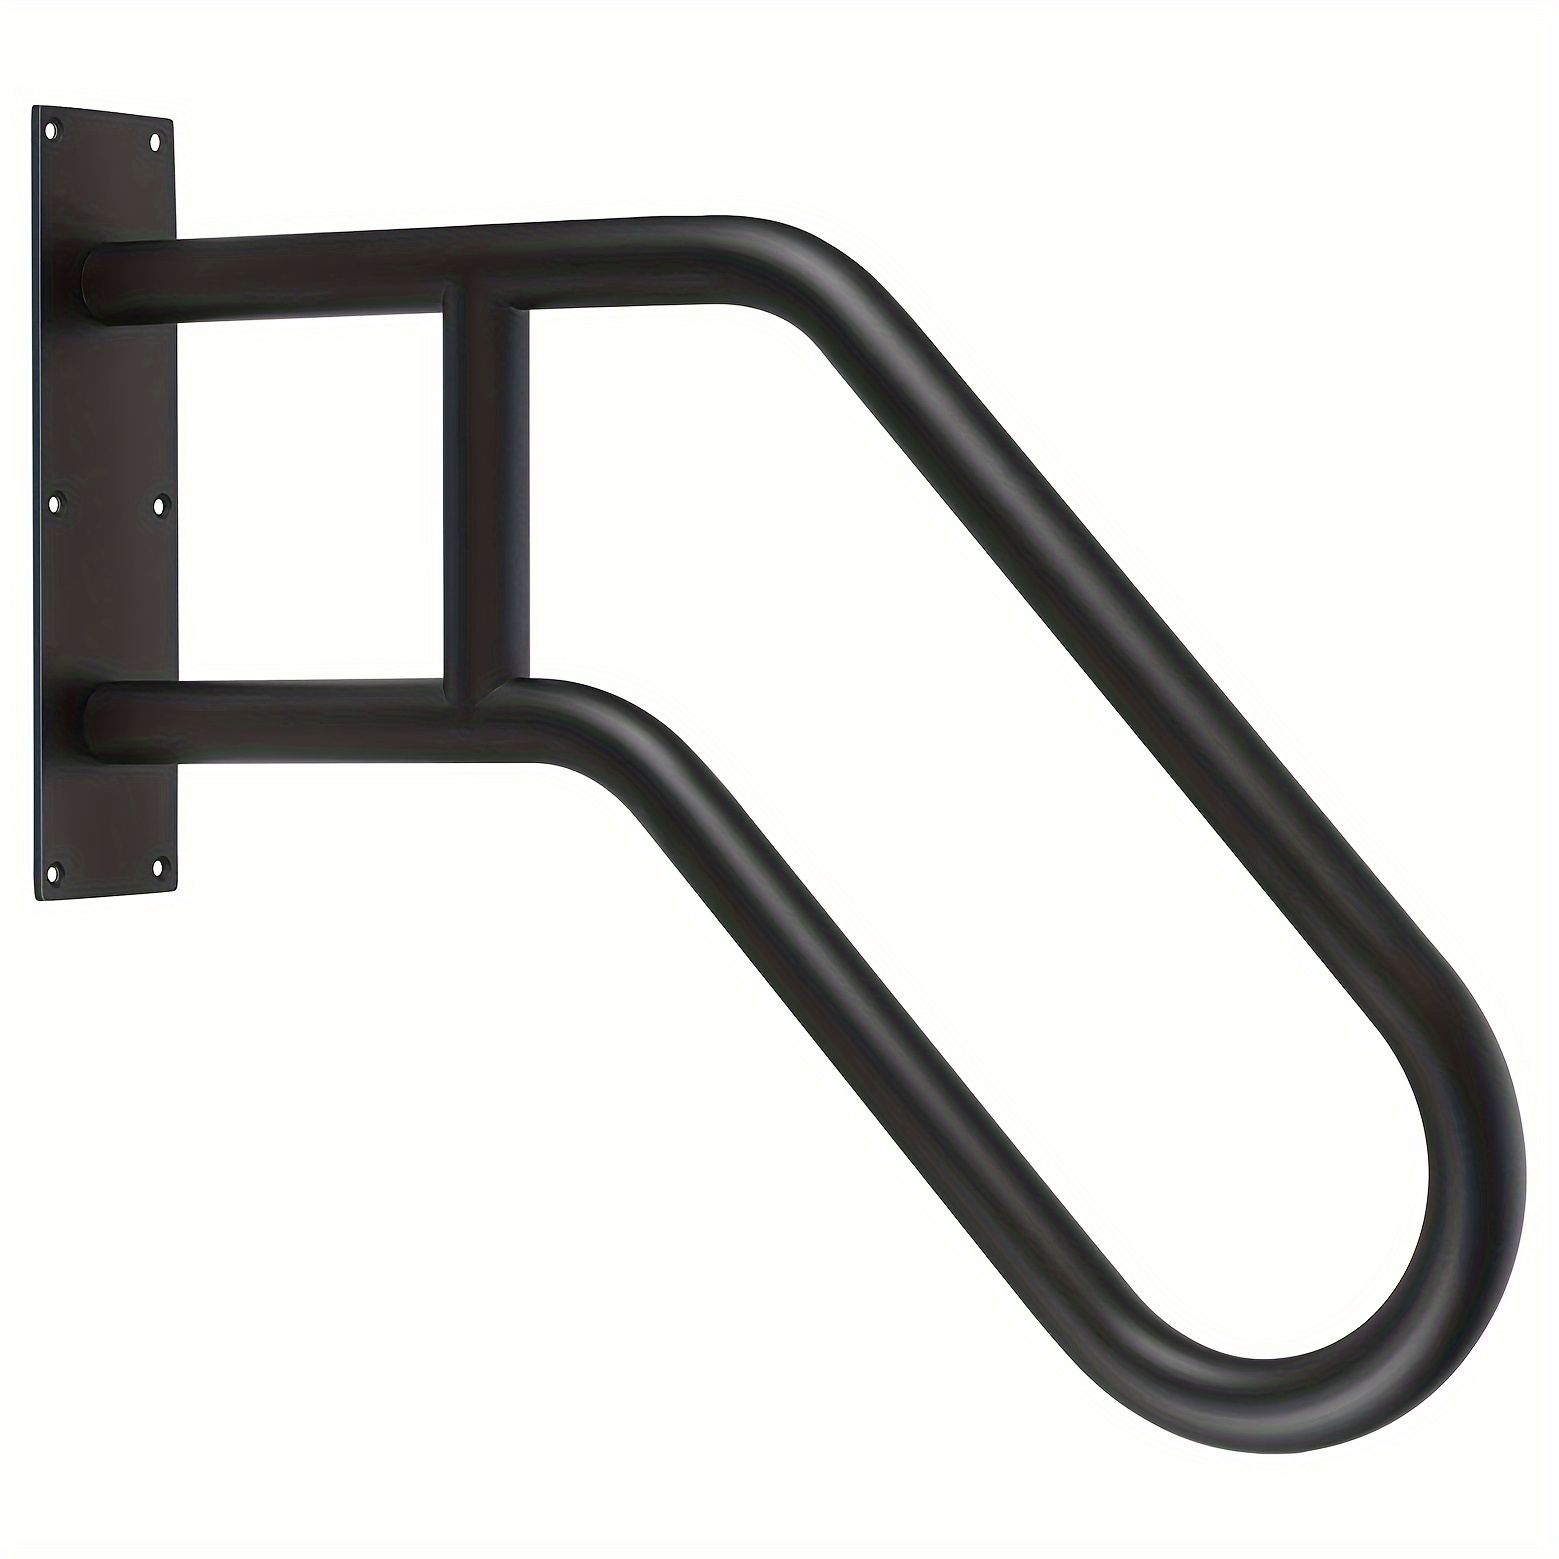 

1pc Outdoor Stair Handrail Kit For Anti-slip Black Pipe Staircase Handrail, Ensuring Safety For The Elderly And Children, Entrance Staircase Is Equipped With A U-shaped Handrail For Safety